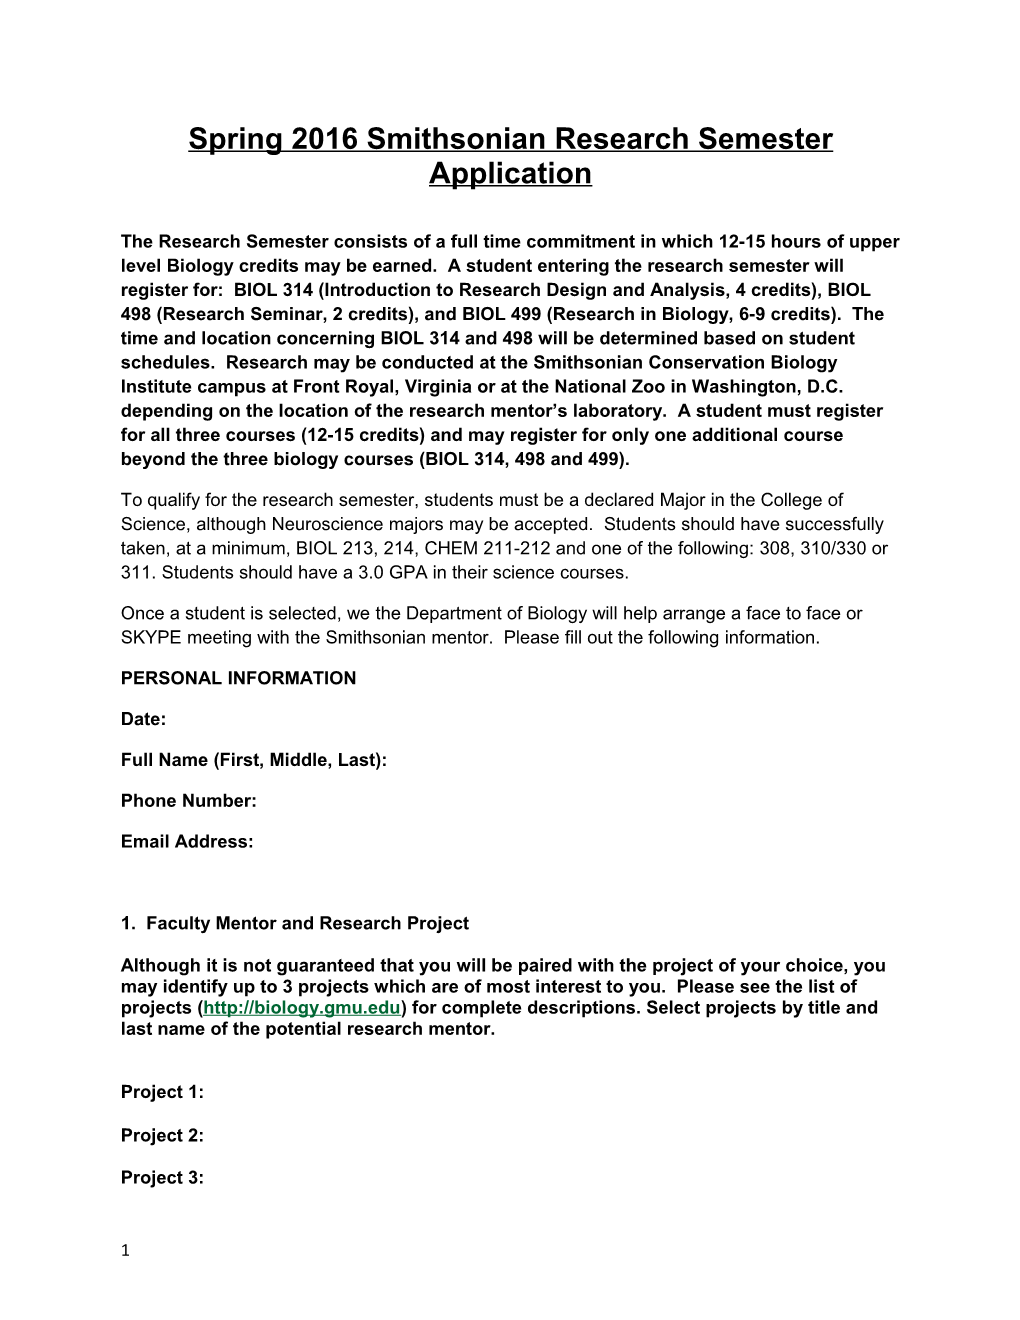 Spring 2016 Smithsonian Research Semester Application